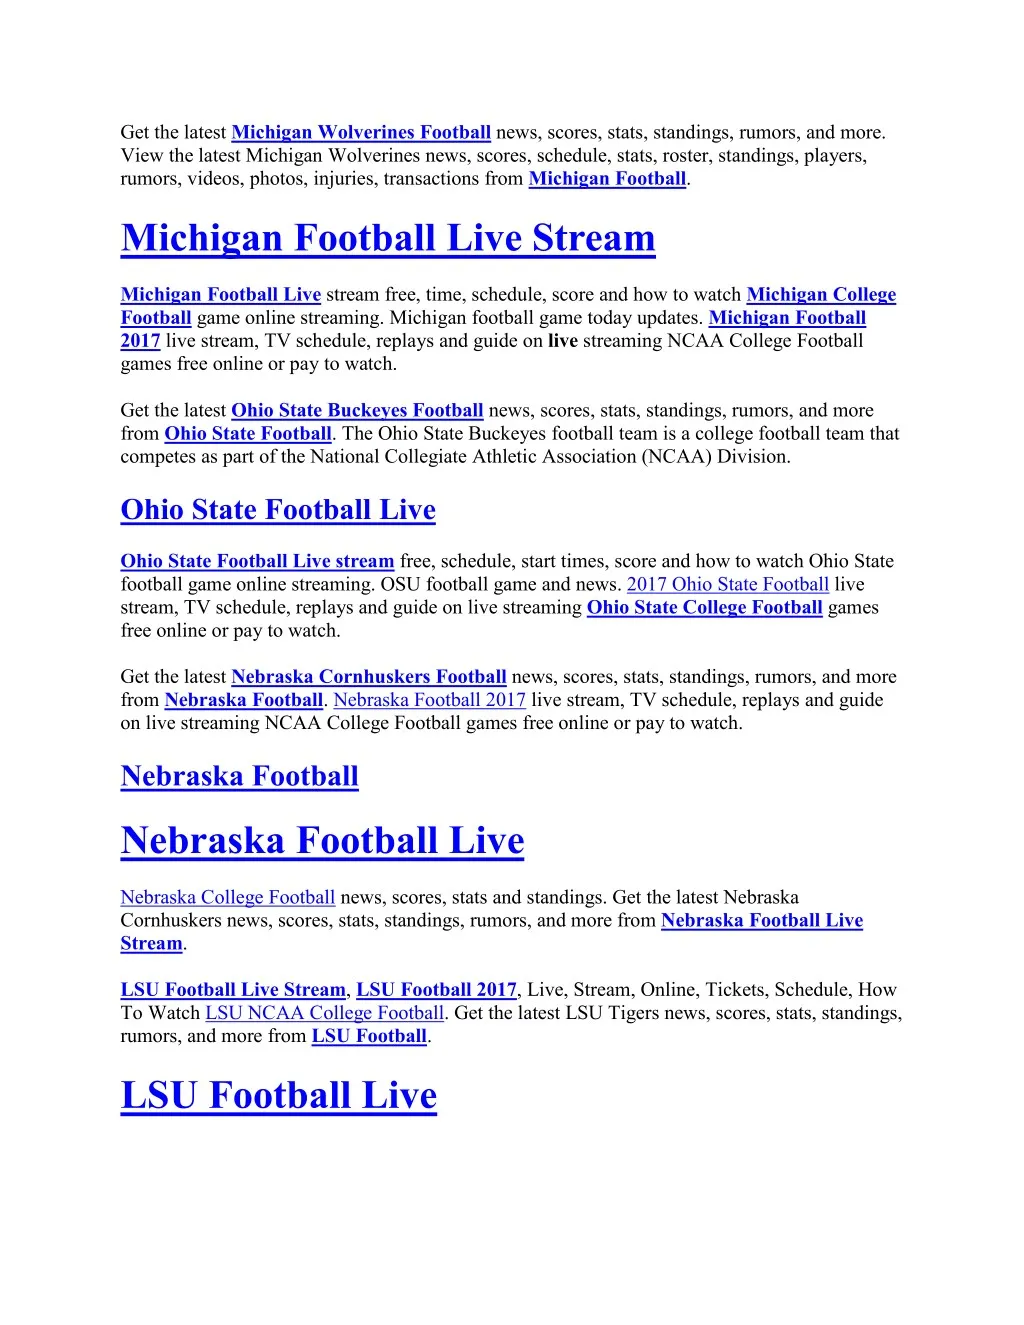 get the latest michigan wolverines football news